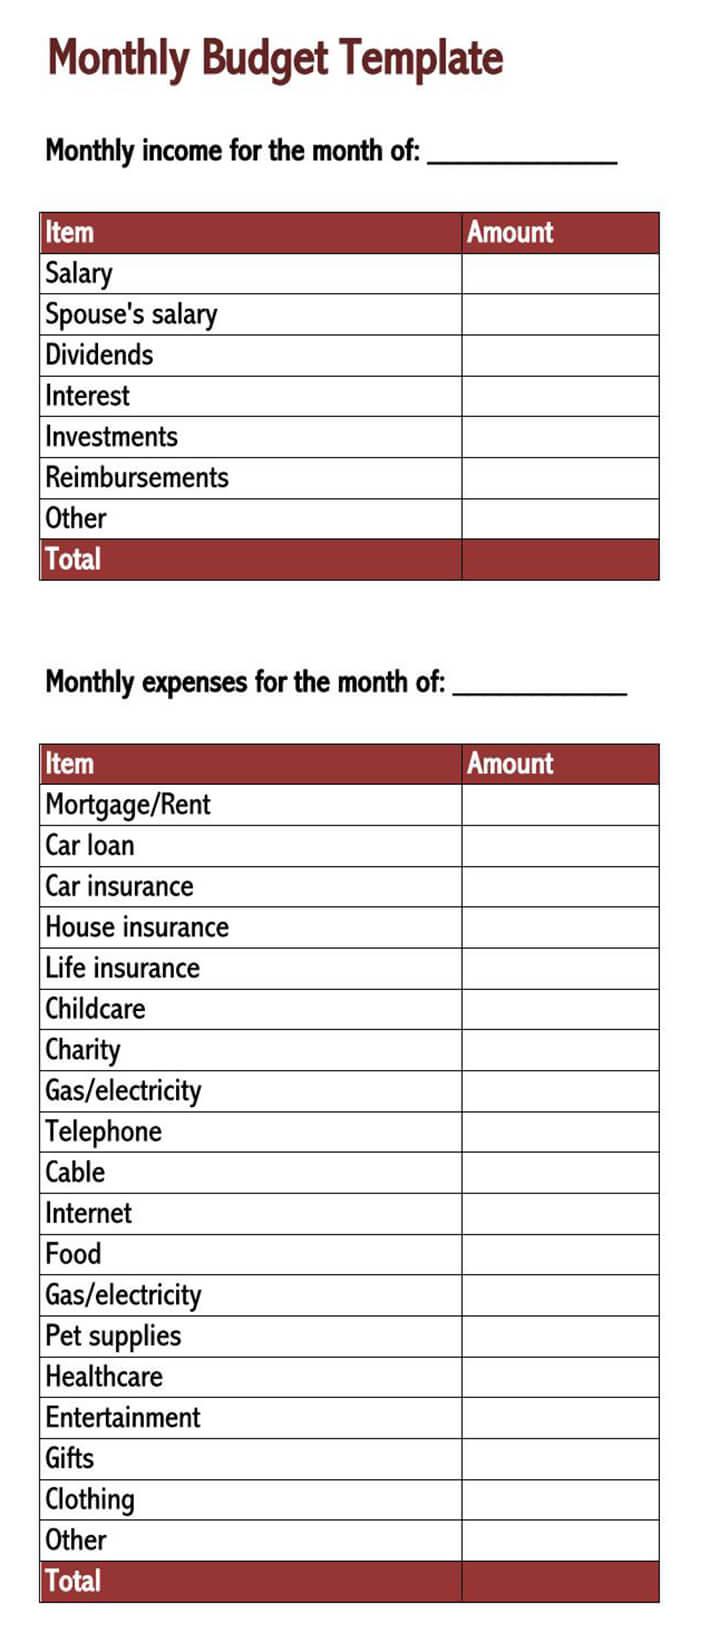 Excel Personal Monthly Budget Template - Free Download02